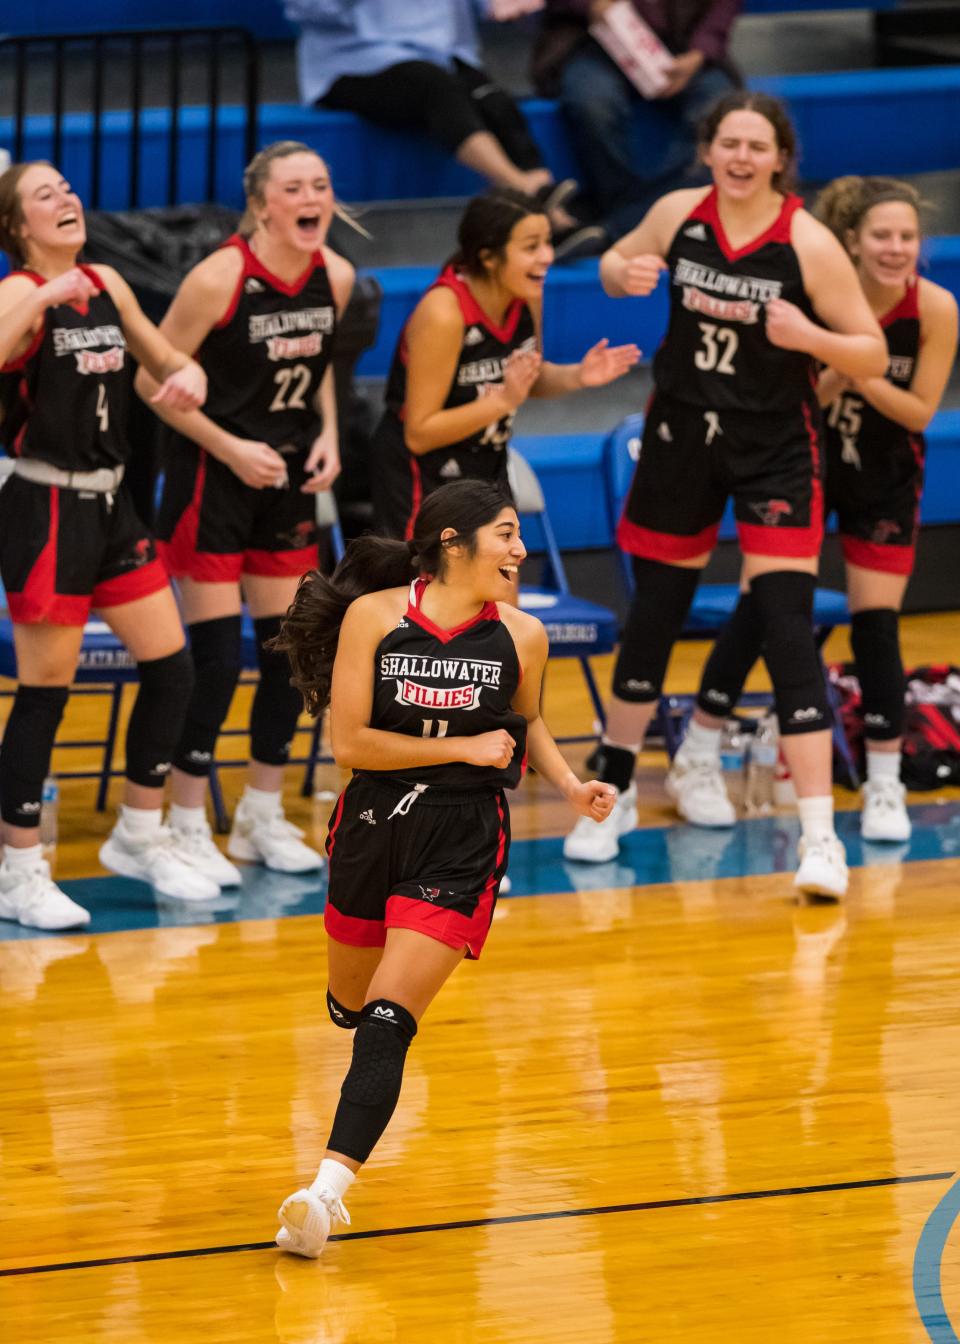 Shallowater’s bench celebrates after a made shot by Avery Velasquez (11) against Estacado on Tuesday, Nov. 30, 2021, at Estacado High School in Lubbock, Texas.